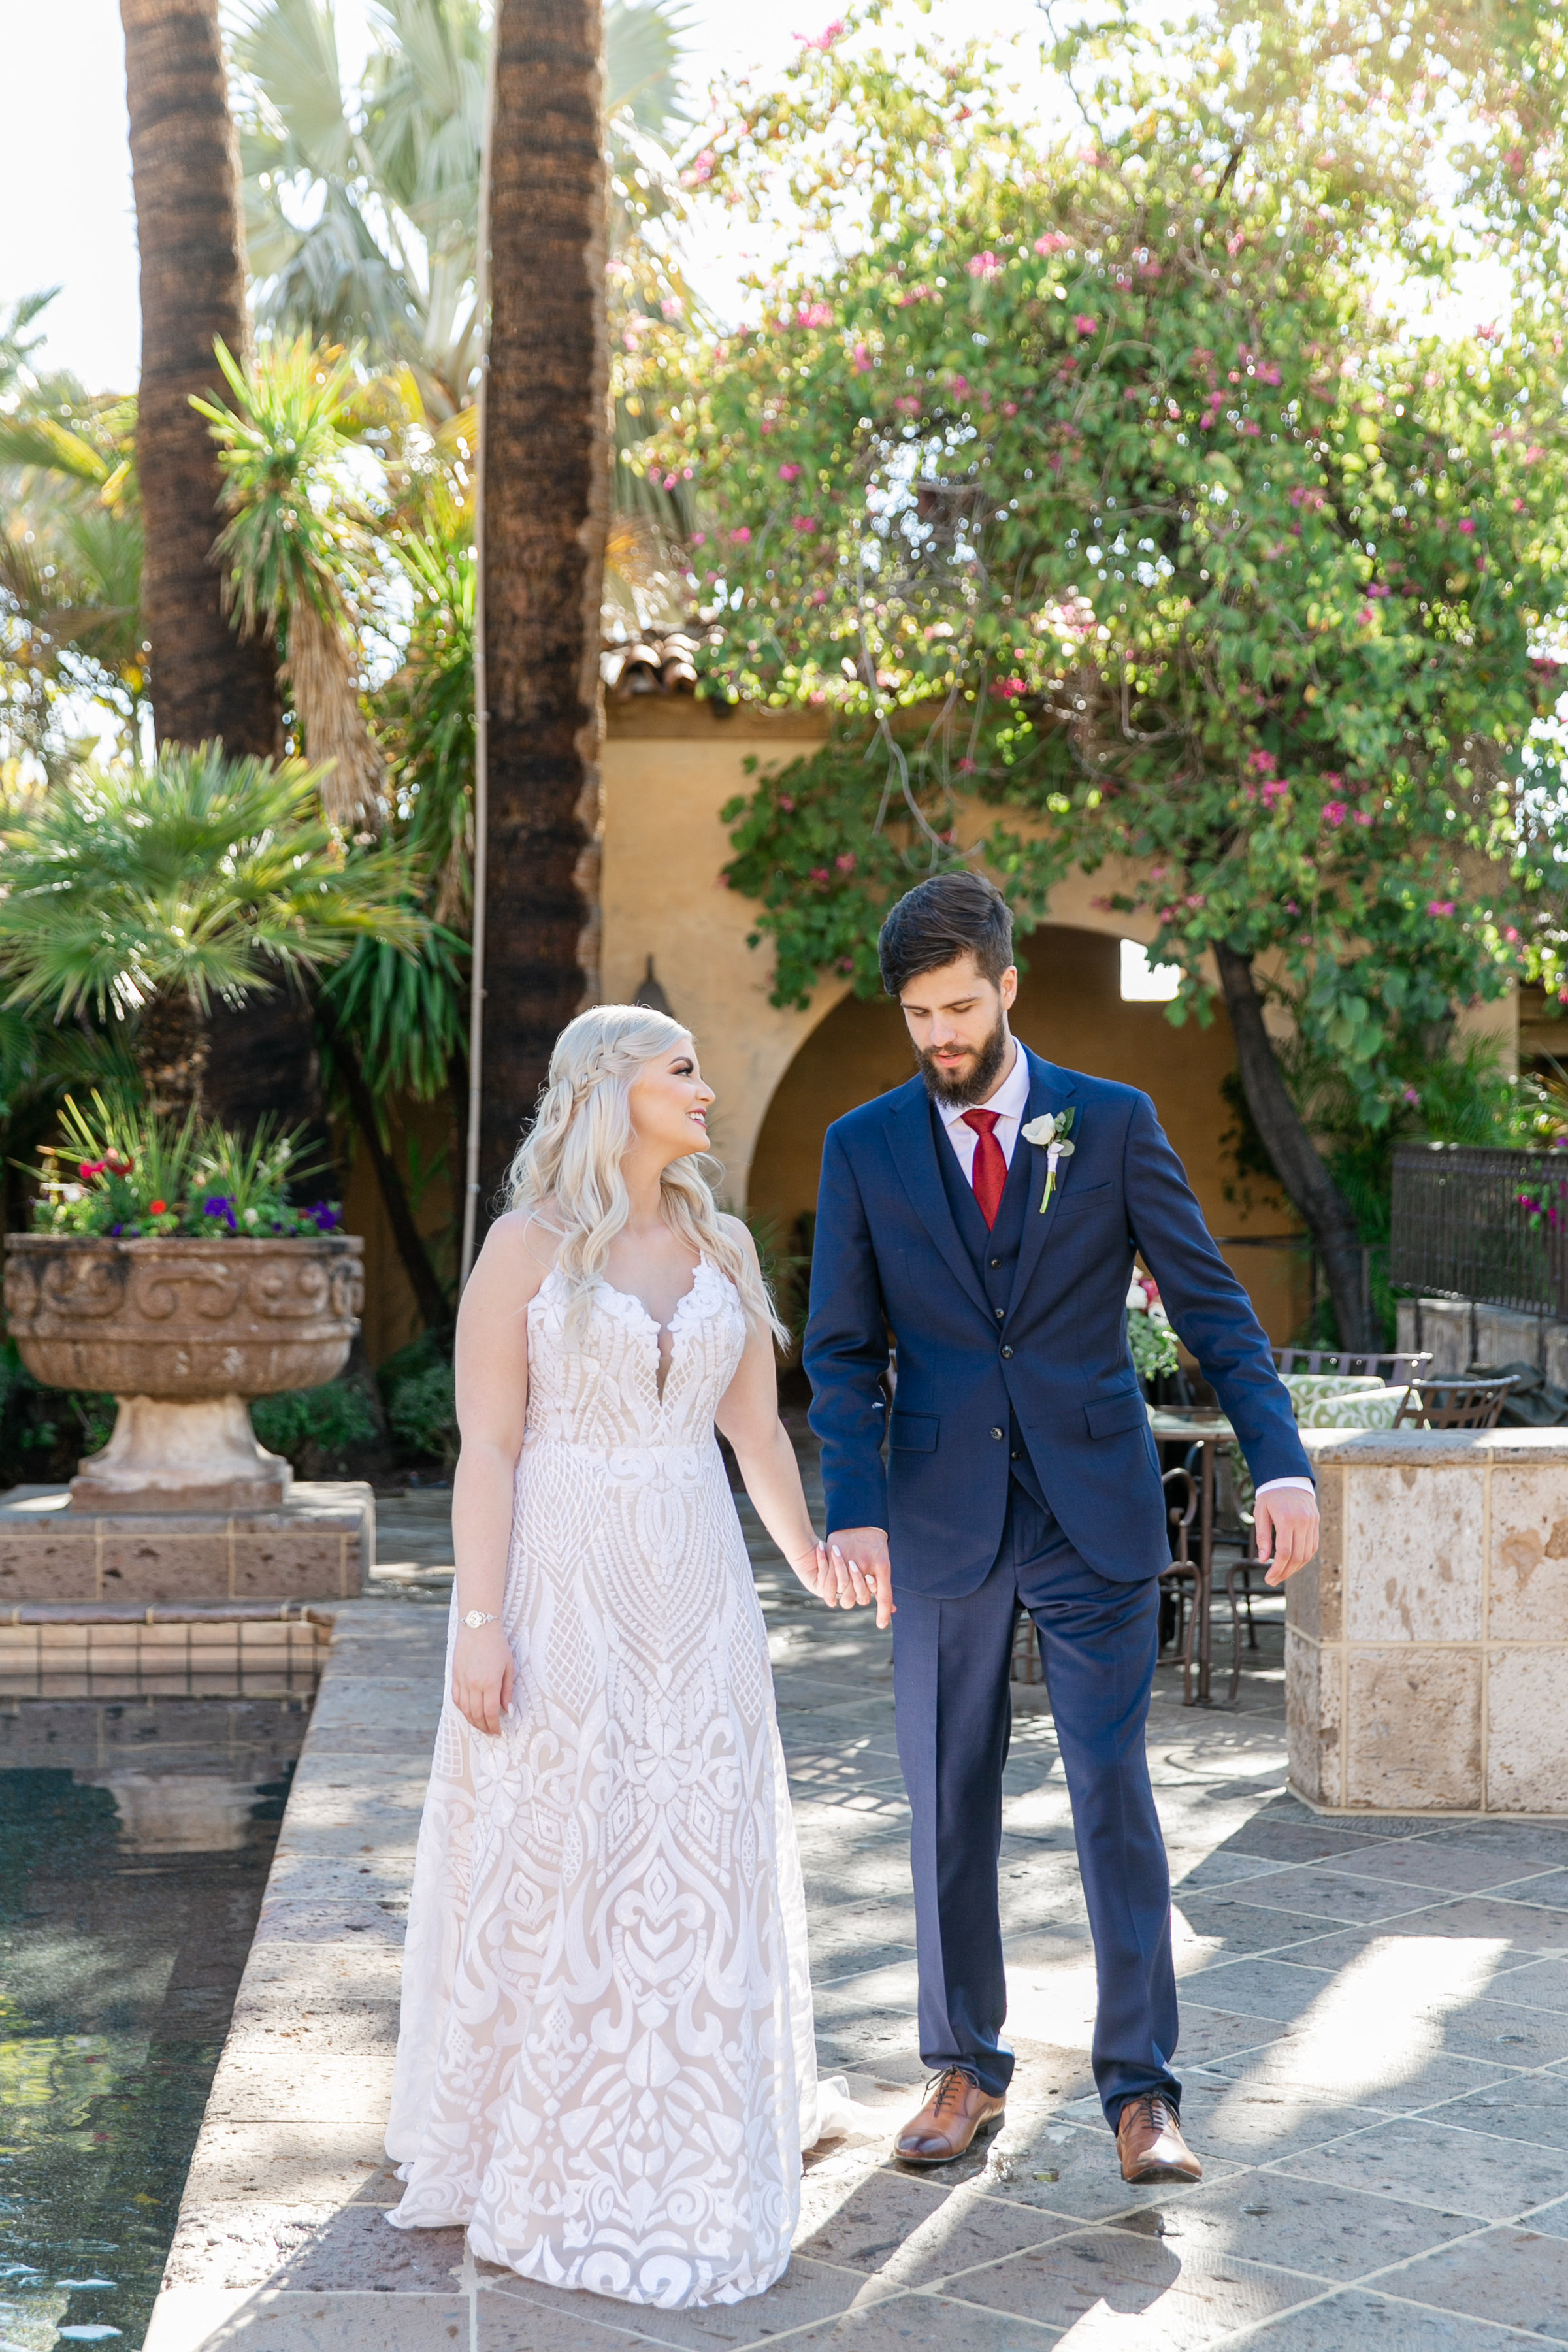 Karlie Colleen Photography - The Royal Palms Wedding - Some Like It Classic - Alex & Sam-131